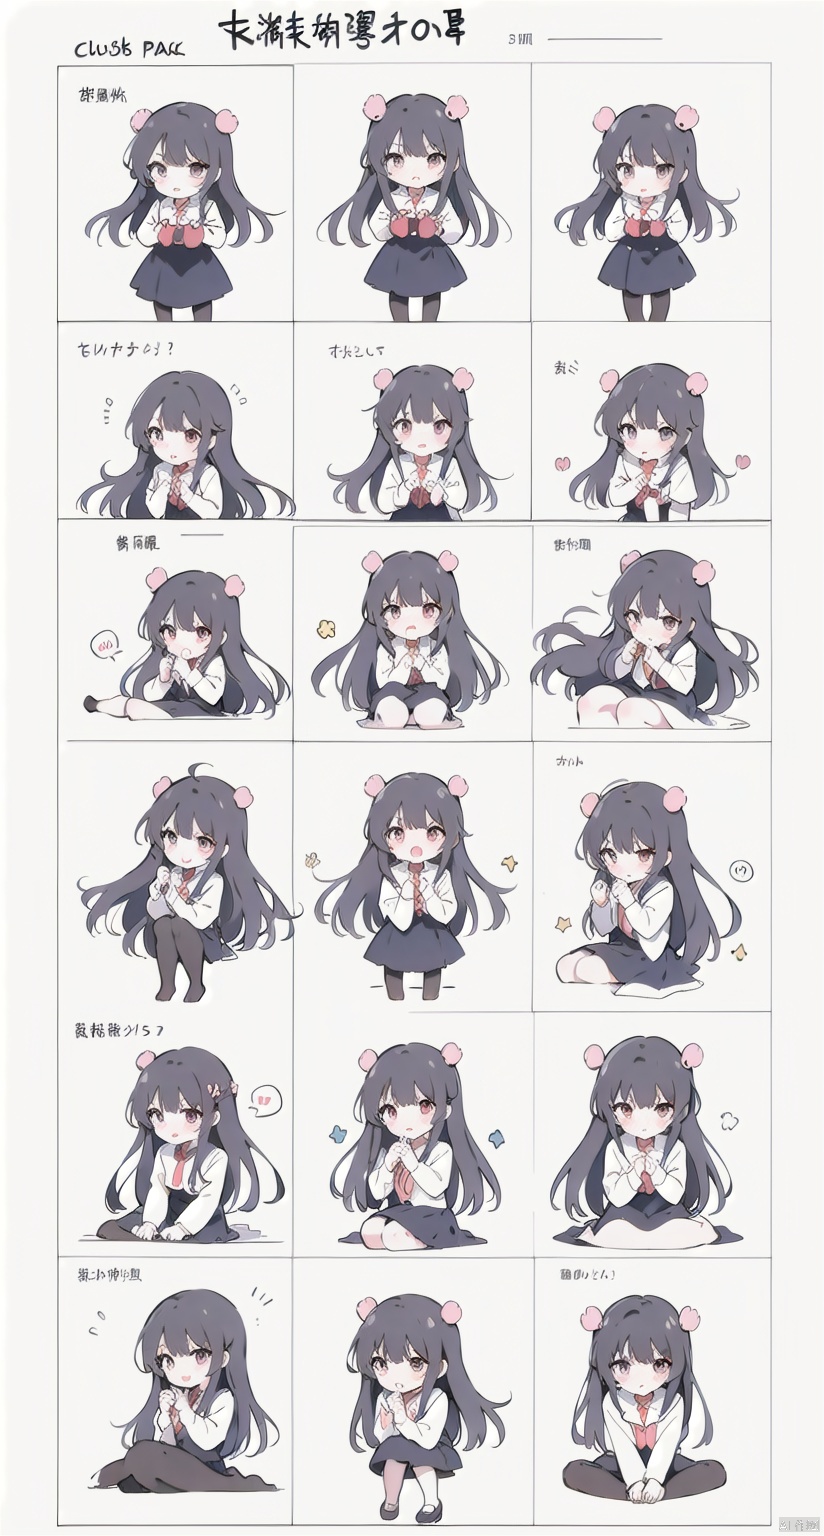 more girl,sakurajima mail,Emoji packs, various actions and expressions, stickers,(blush:1.4),sitting,panorama,column lineup,expressions,three views from front, back and side, costume setup materials,reference sheet